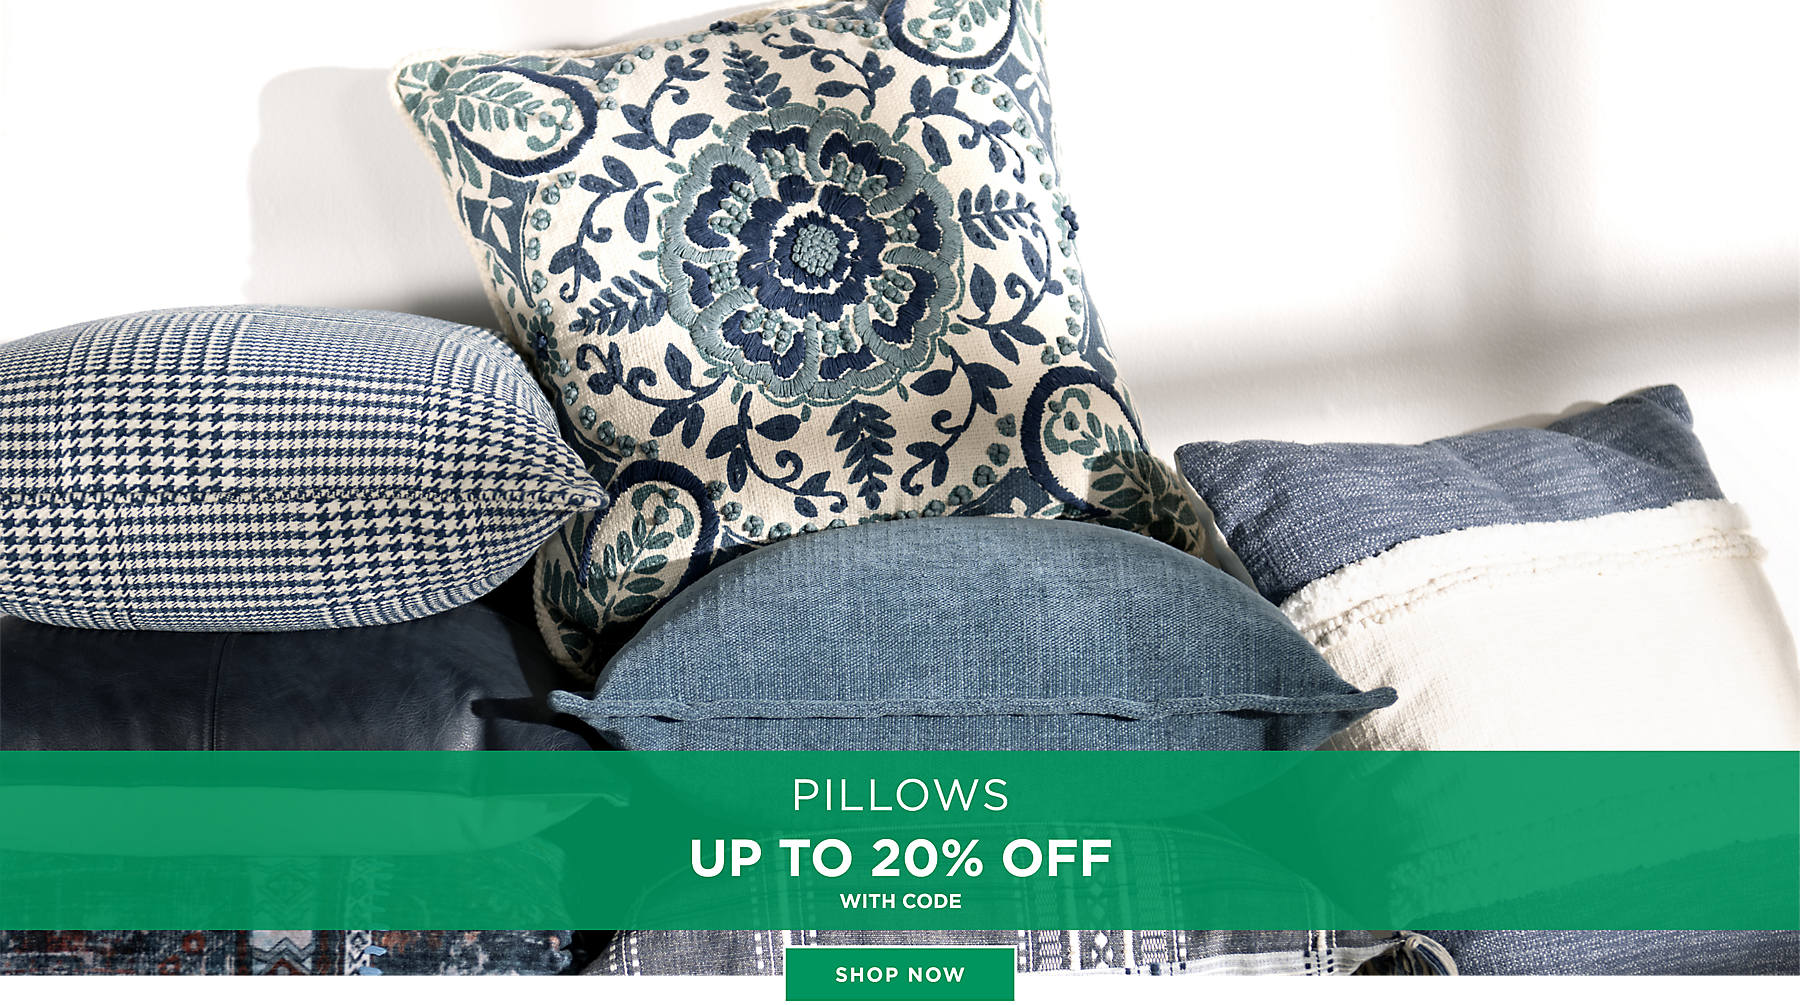 Pillows Up to 20% Off with code Shop Now